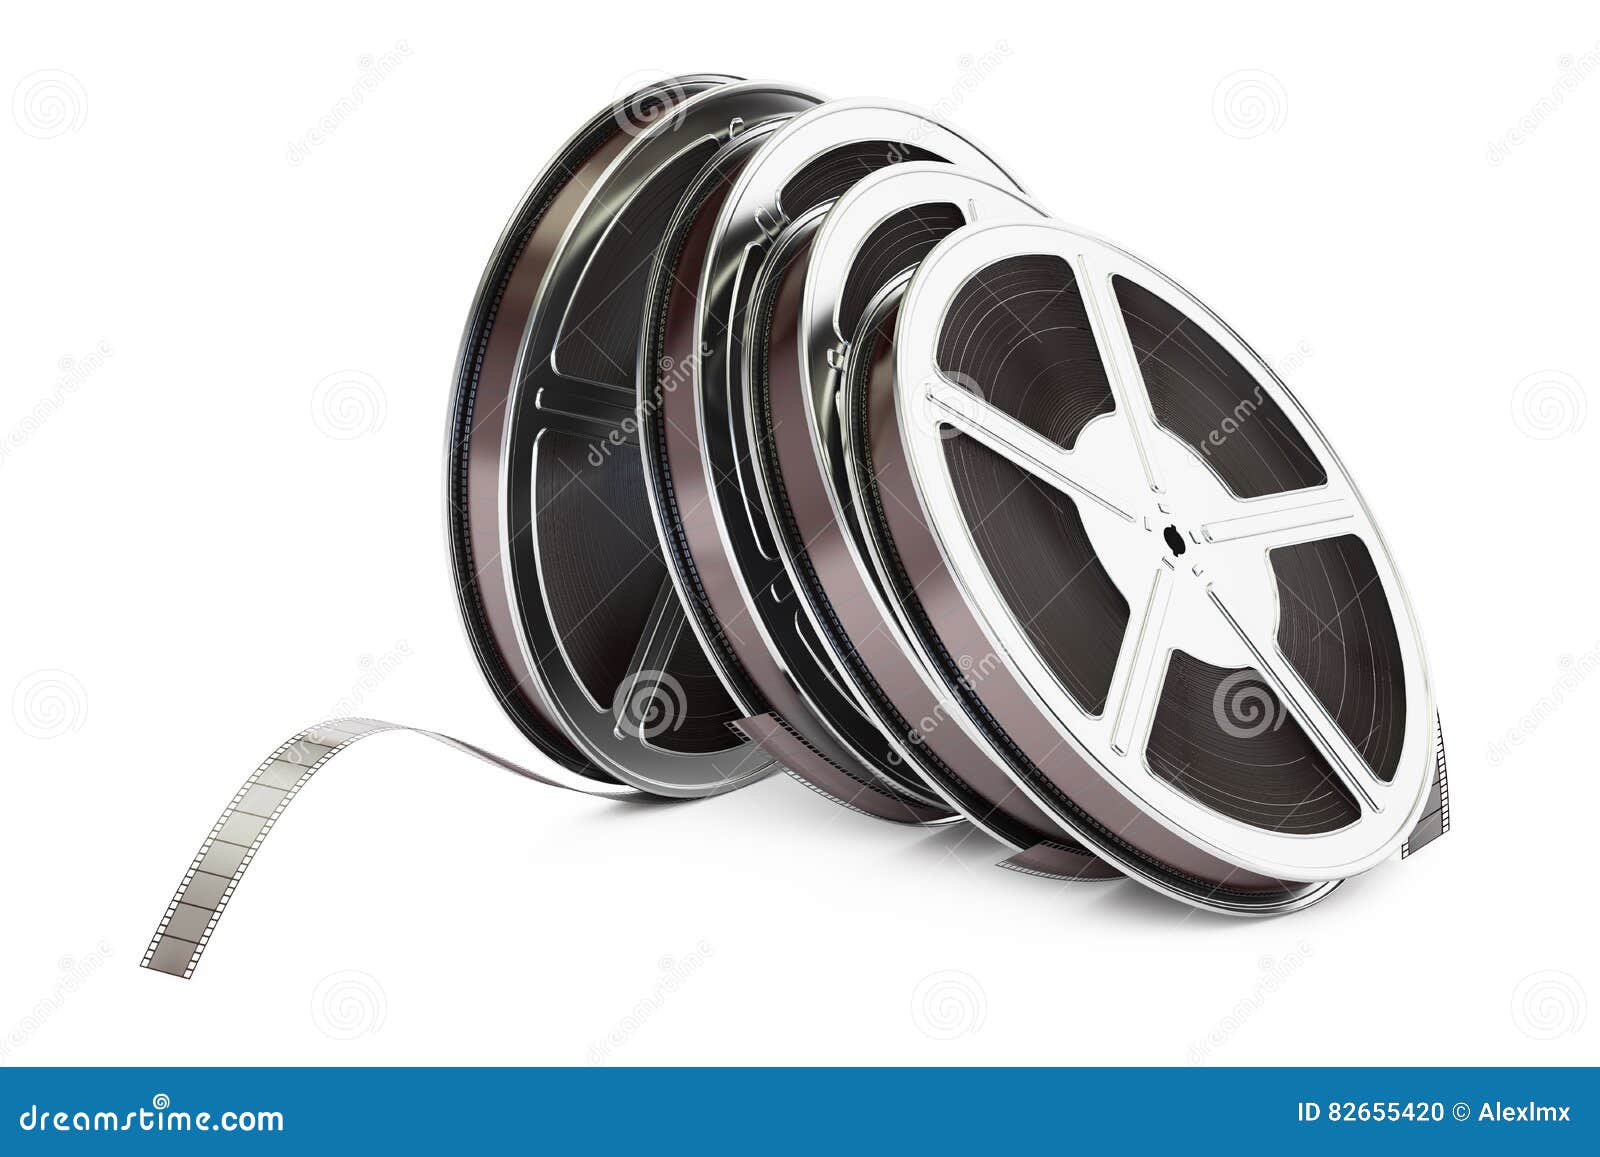 Old photo camera or film reels and strips box isolated con. Vector